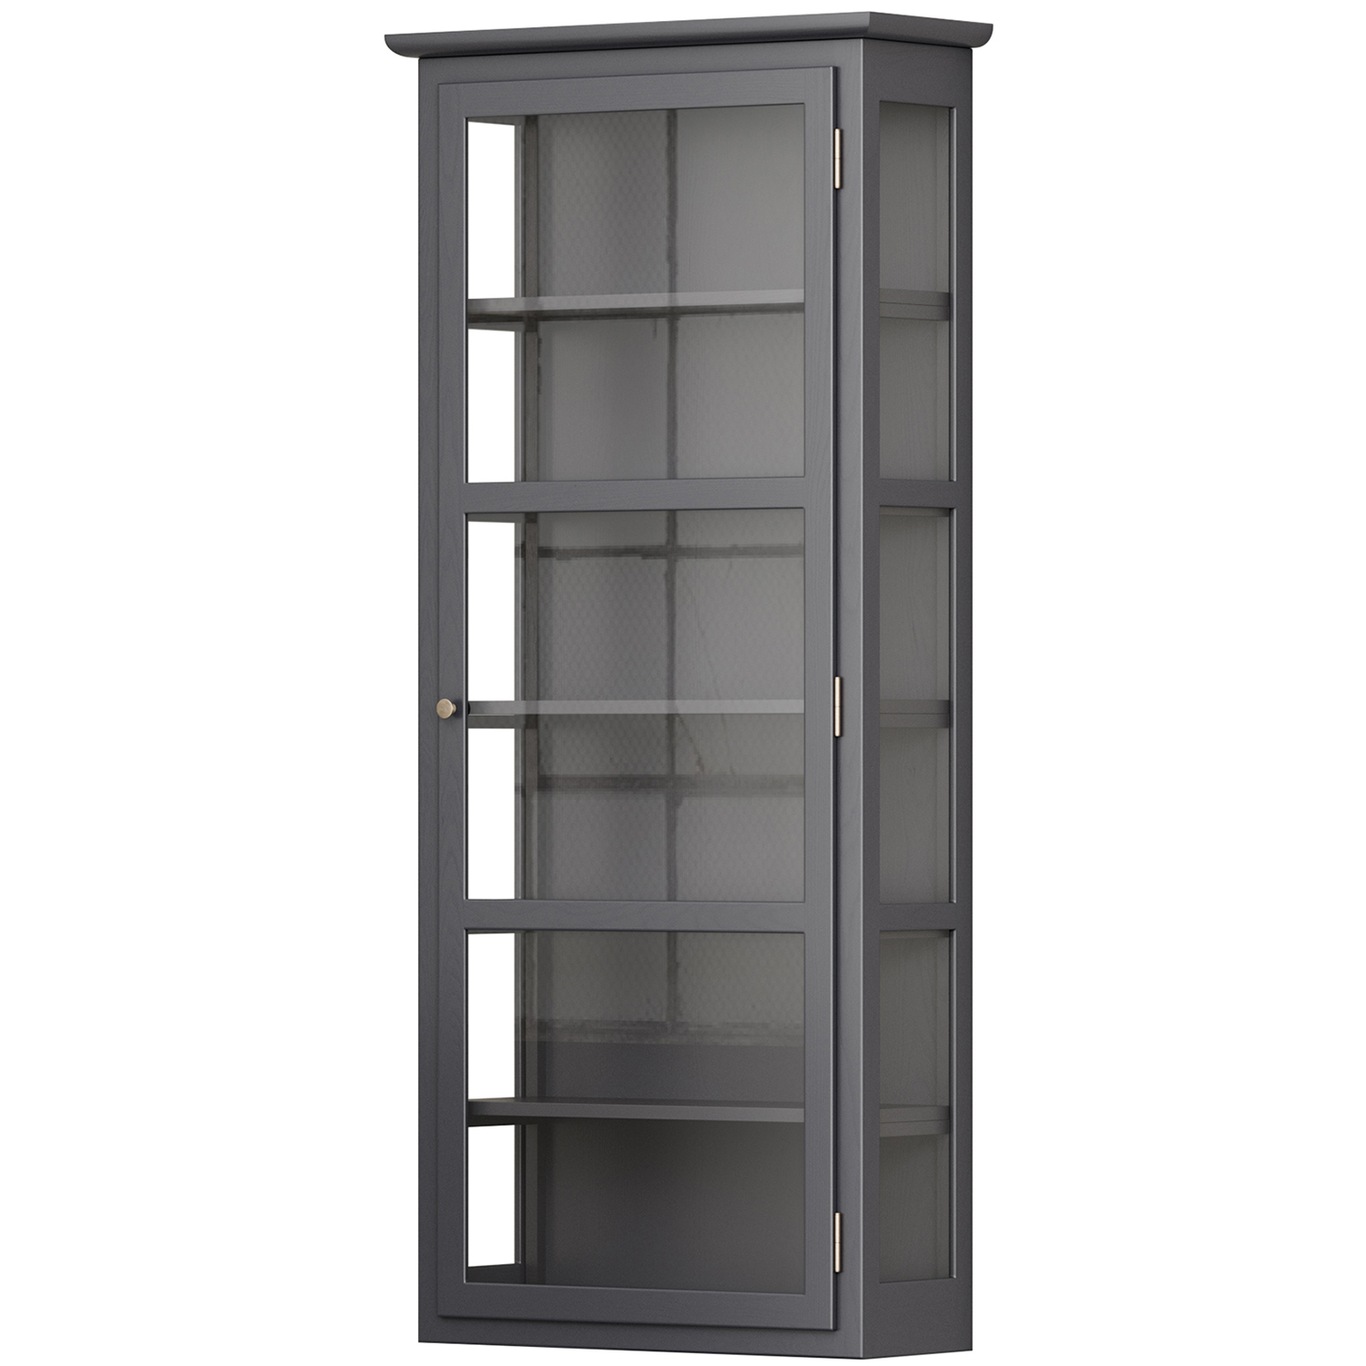 N4 Display cabinet, Anthracite